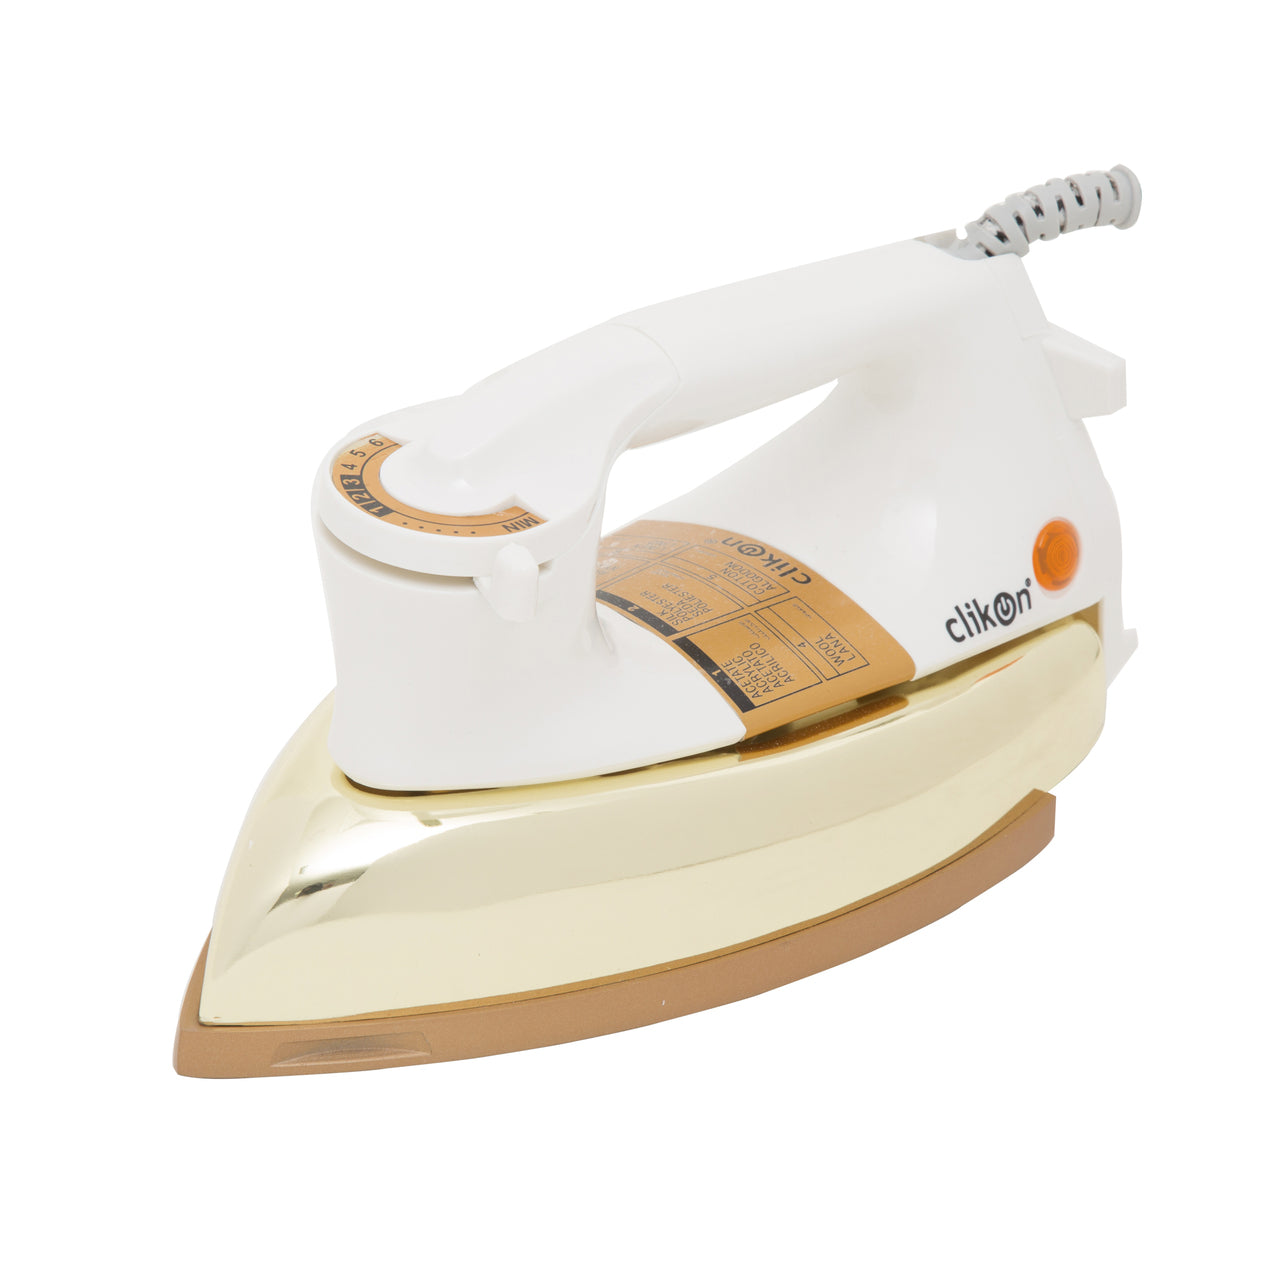 Clikon Heavy Electric Iron 1200W | reliable performance | lightweight | variable steam settings | safety features | stylish | even heat distribution | Halabh.com